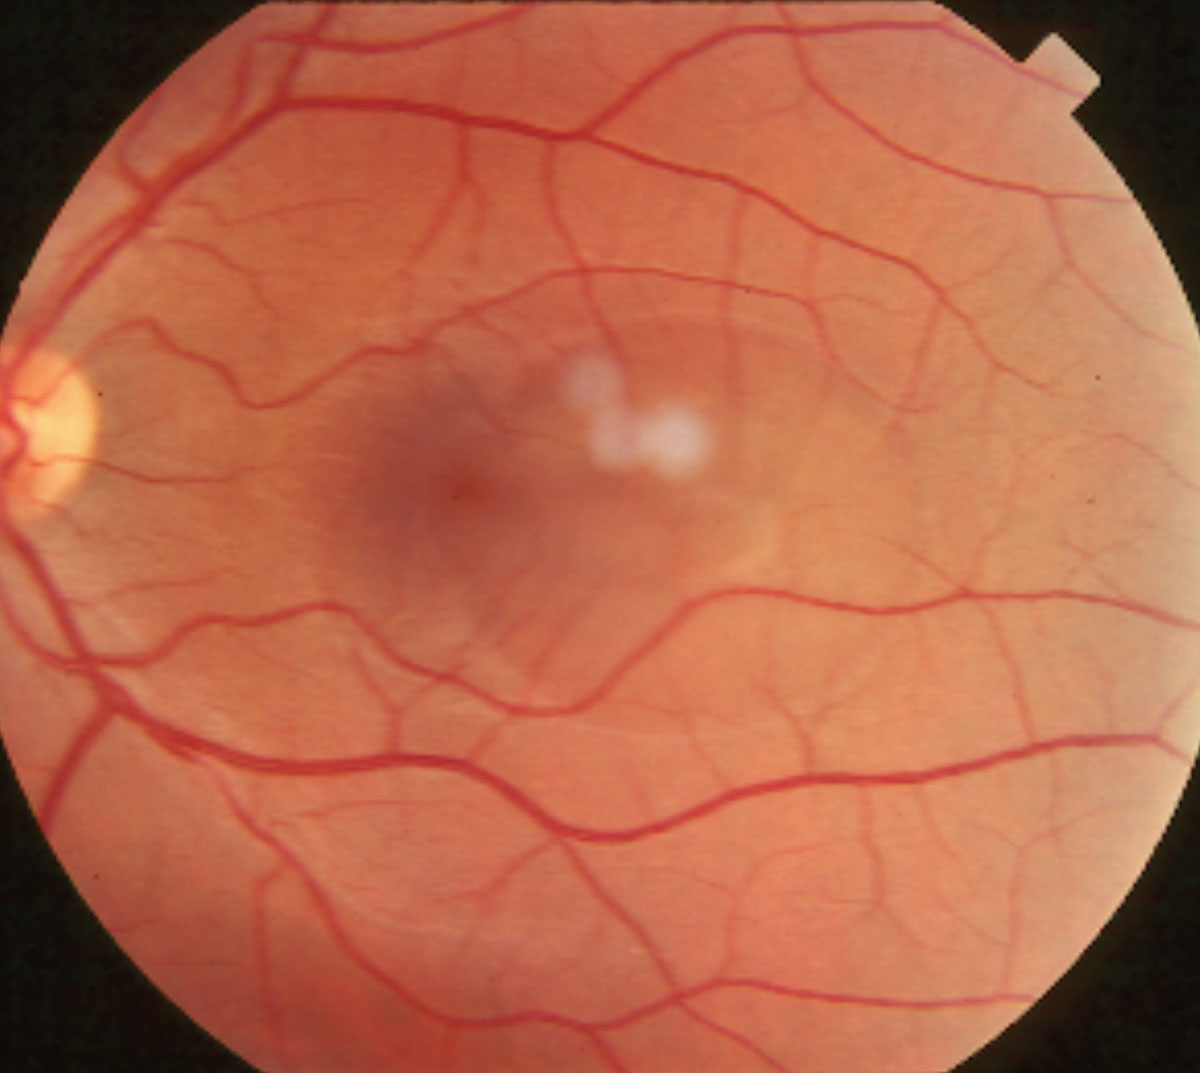 CSCR could lead to serious retinal problems that threaten vision. Photo: Joseph W. Sowka, OD. 